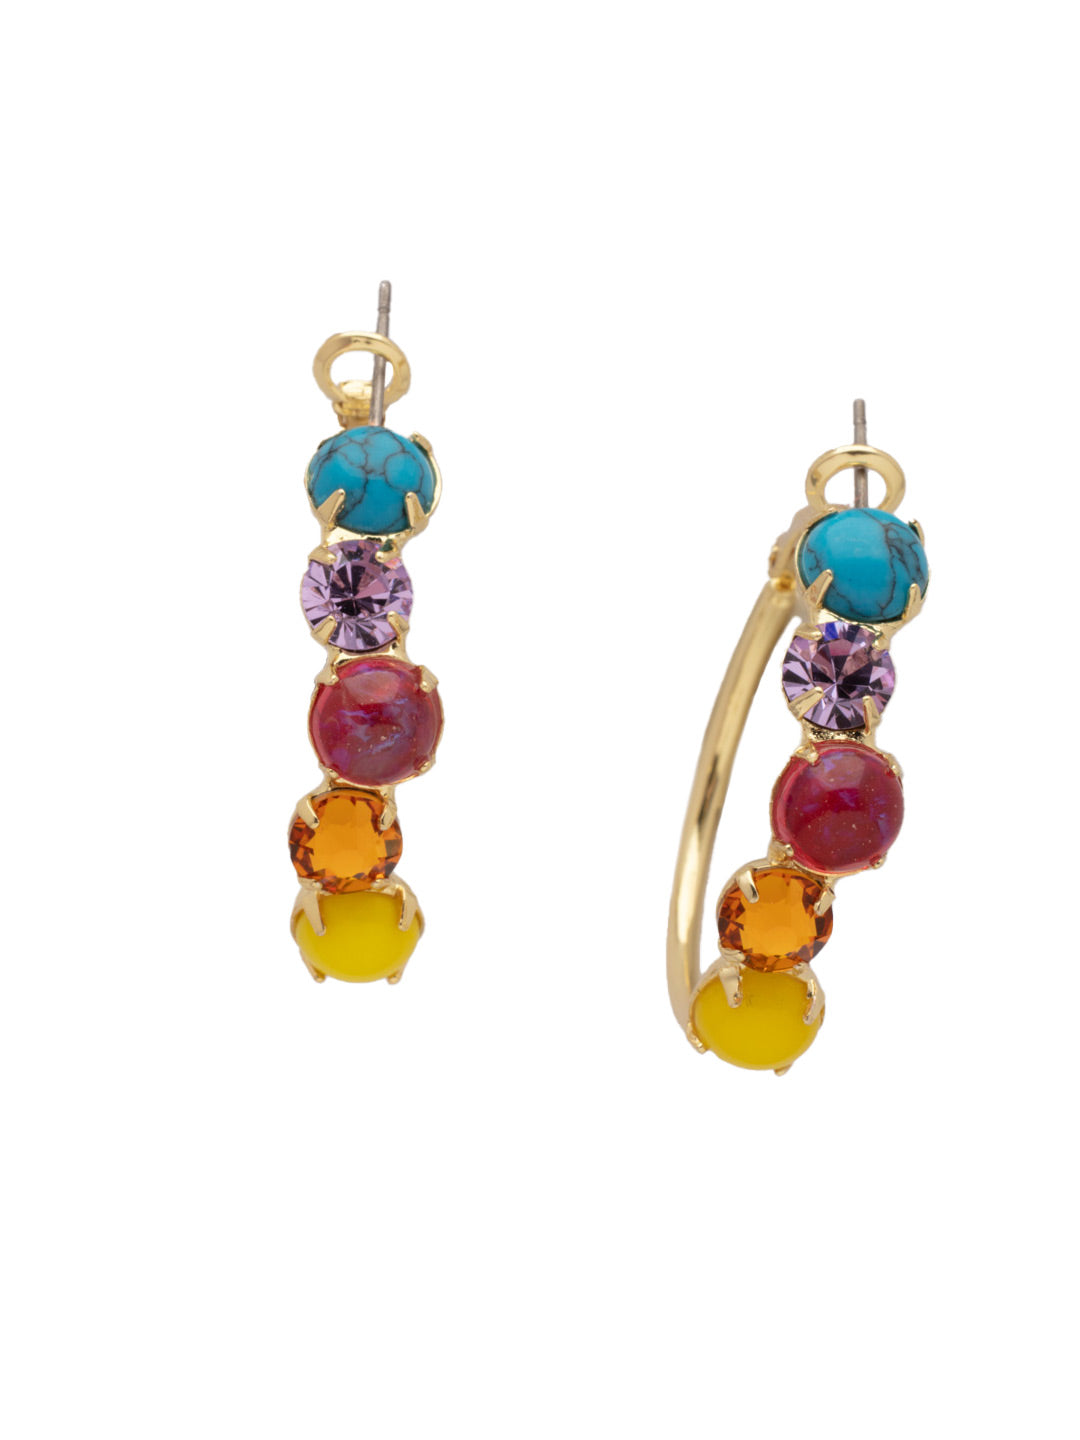 Xena Hoop Earrings - EFF112BGPRI - <p>The Xena Hoop Earrings feature small round cut crystals and semi-precious stones on a classic metal hoop. From Sorrelli's Prism collection in our Bright Gold-tone finish.</p>